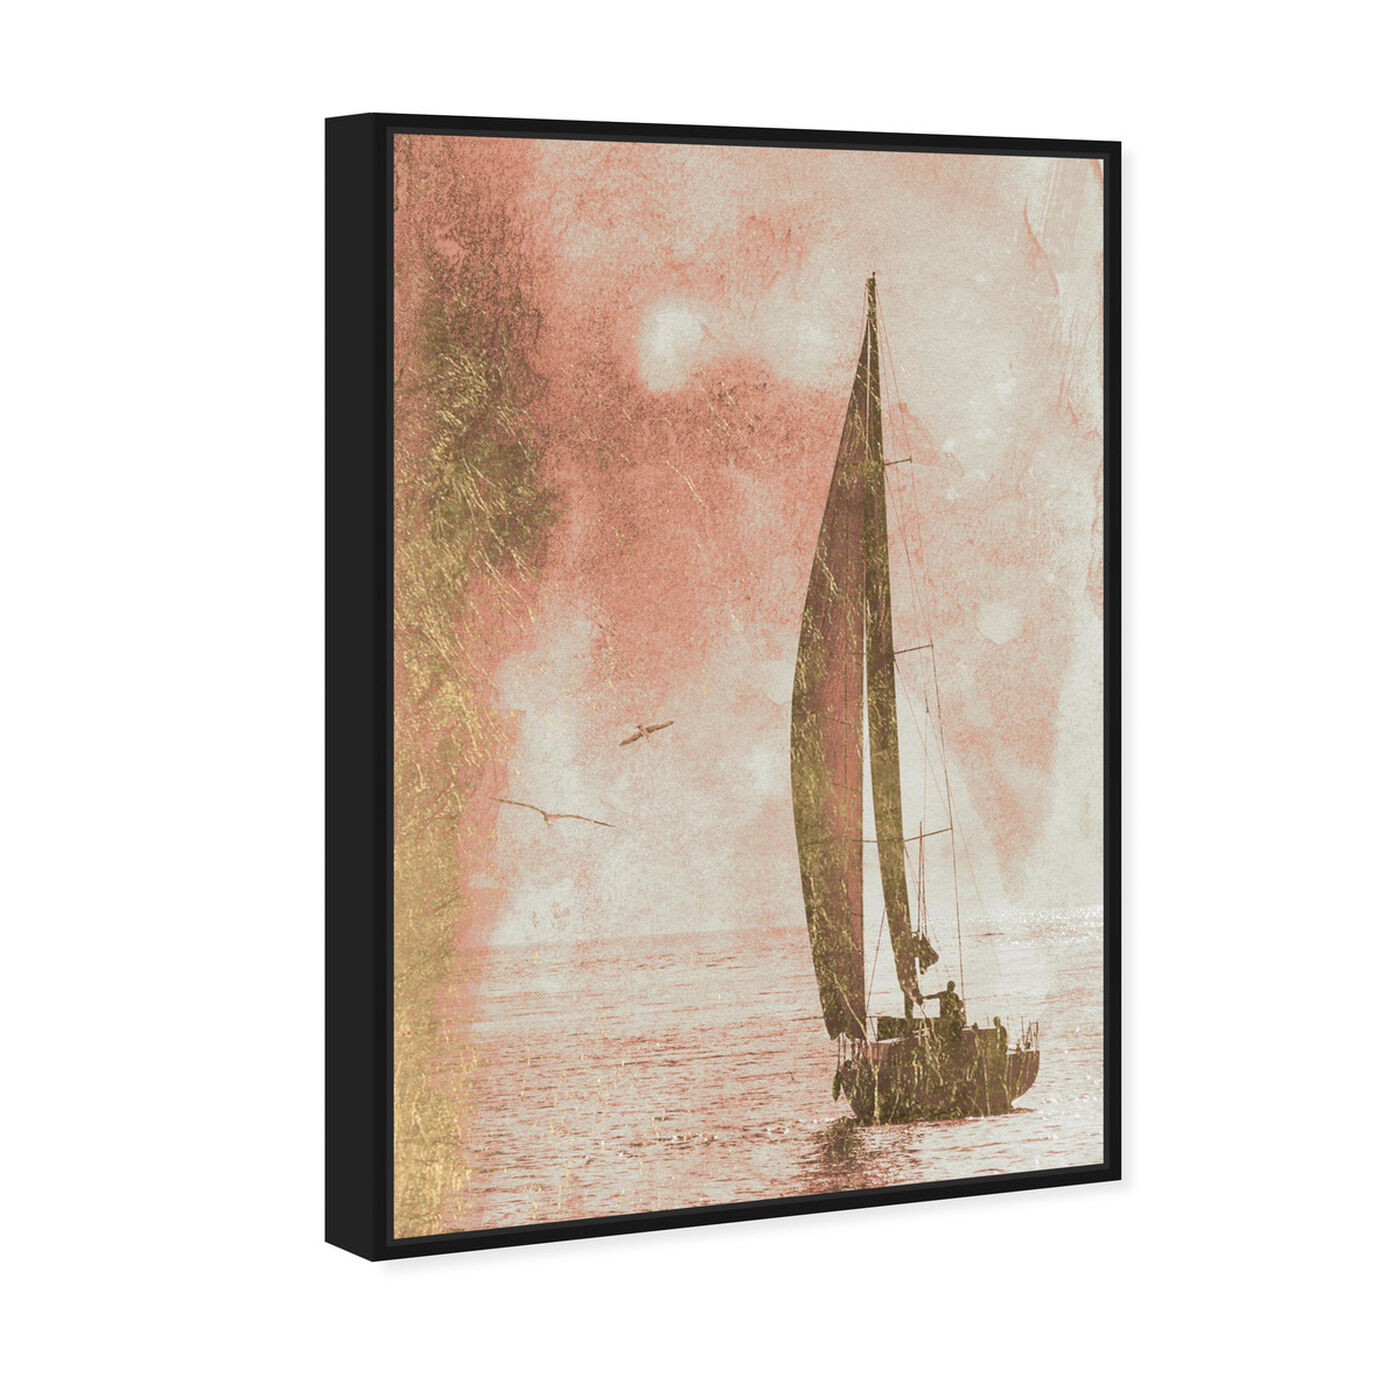 Angled view of Sails of Gold featuring transportation and boats and yachts art.